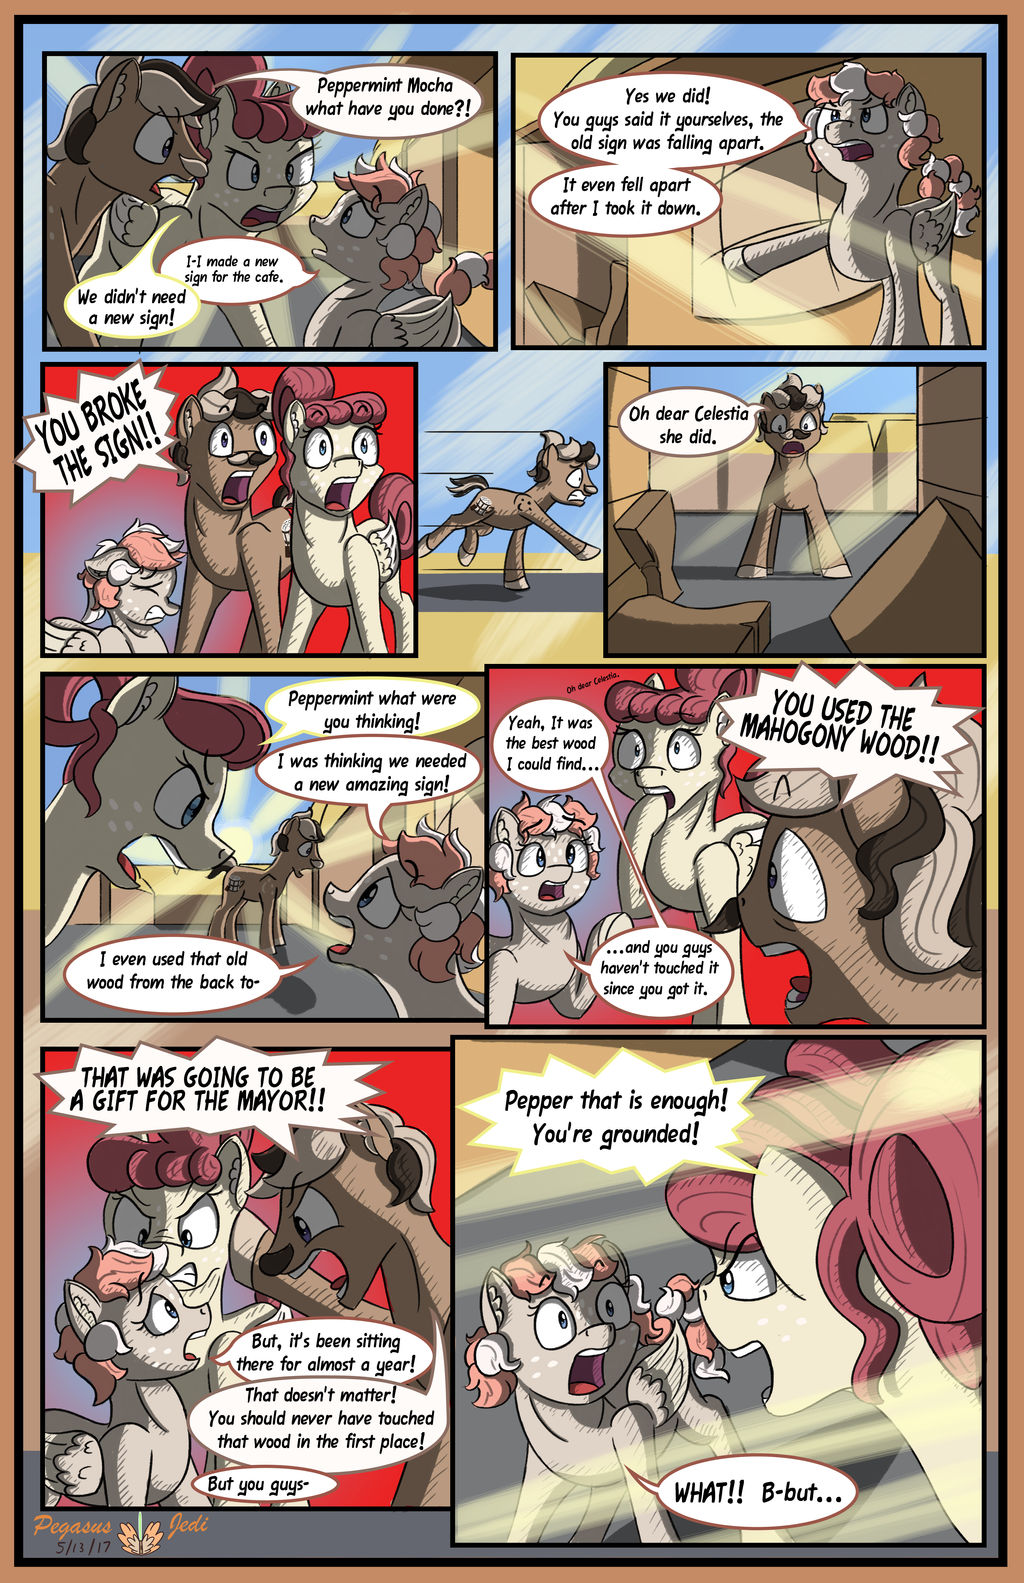 A Dash of Peppermint: Pg 9